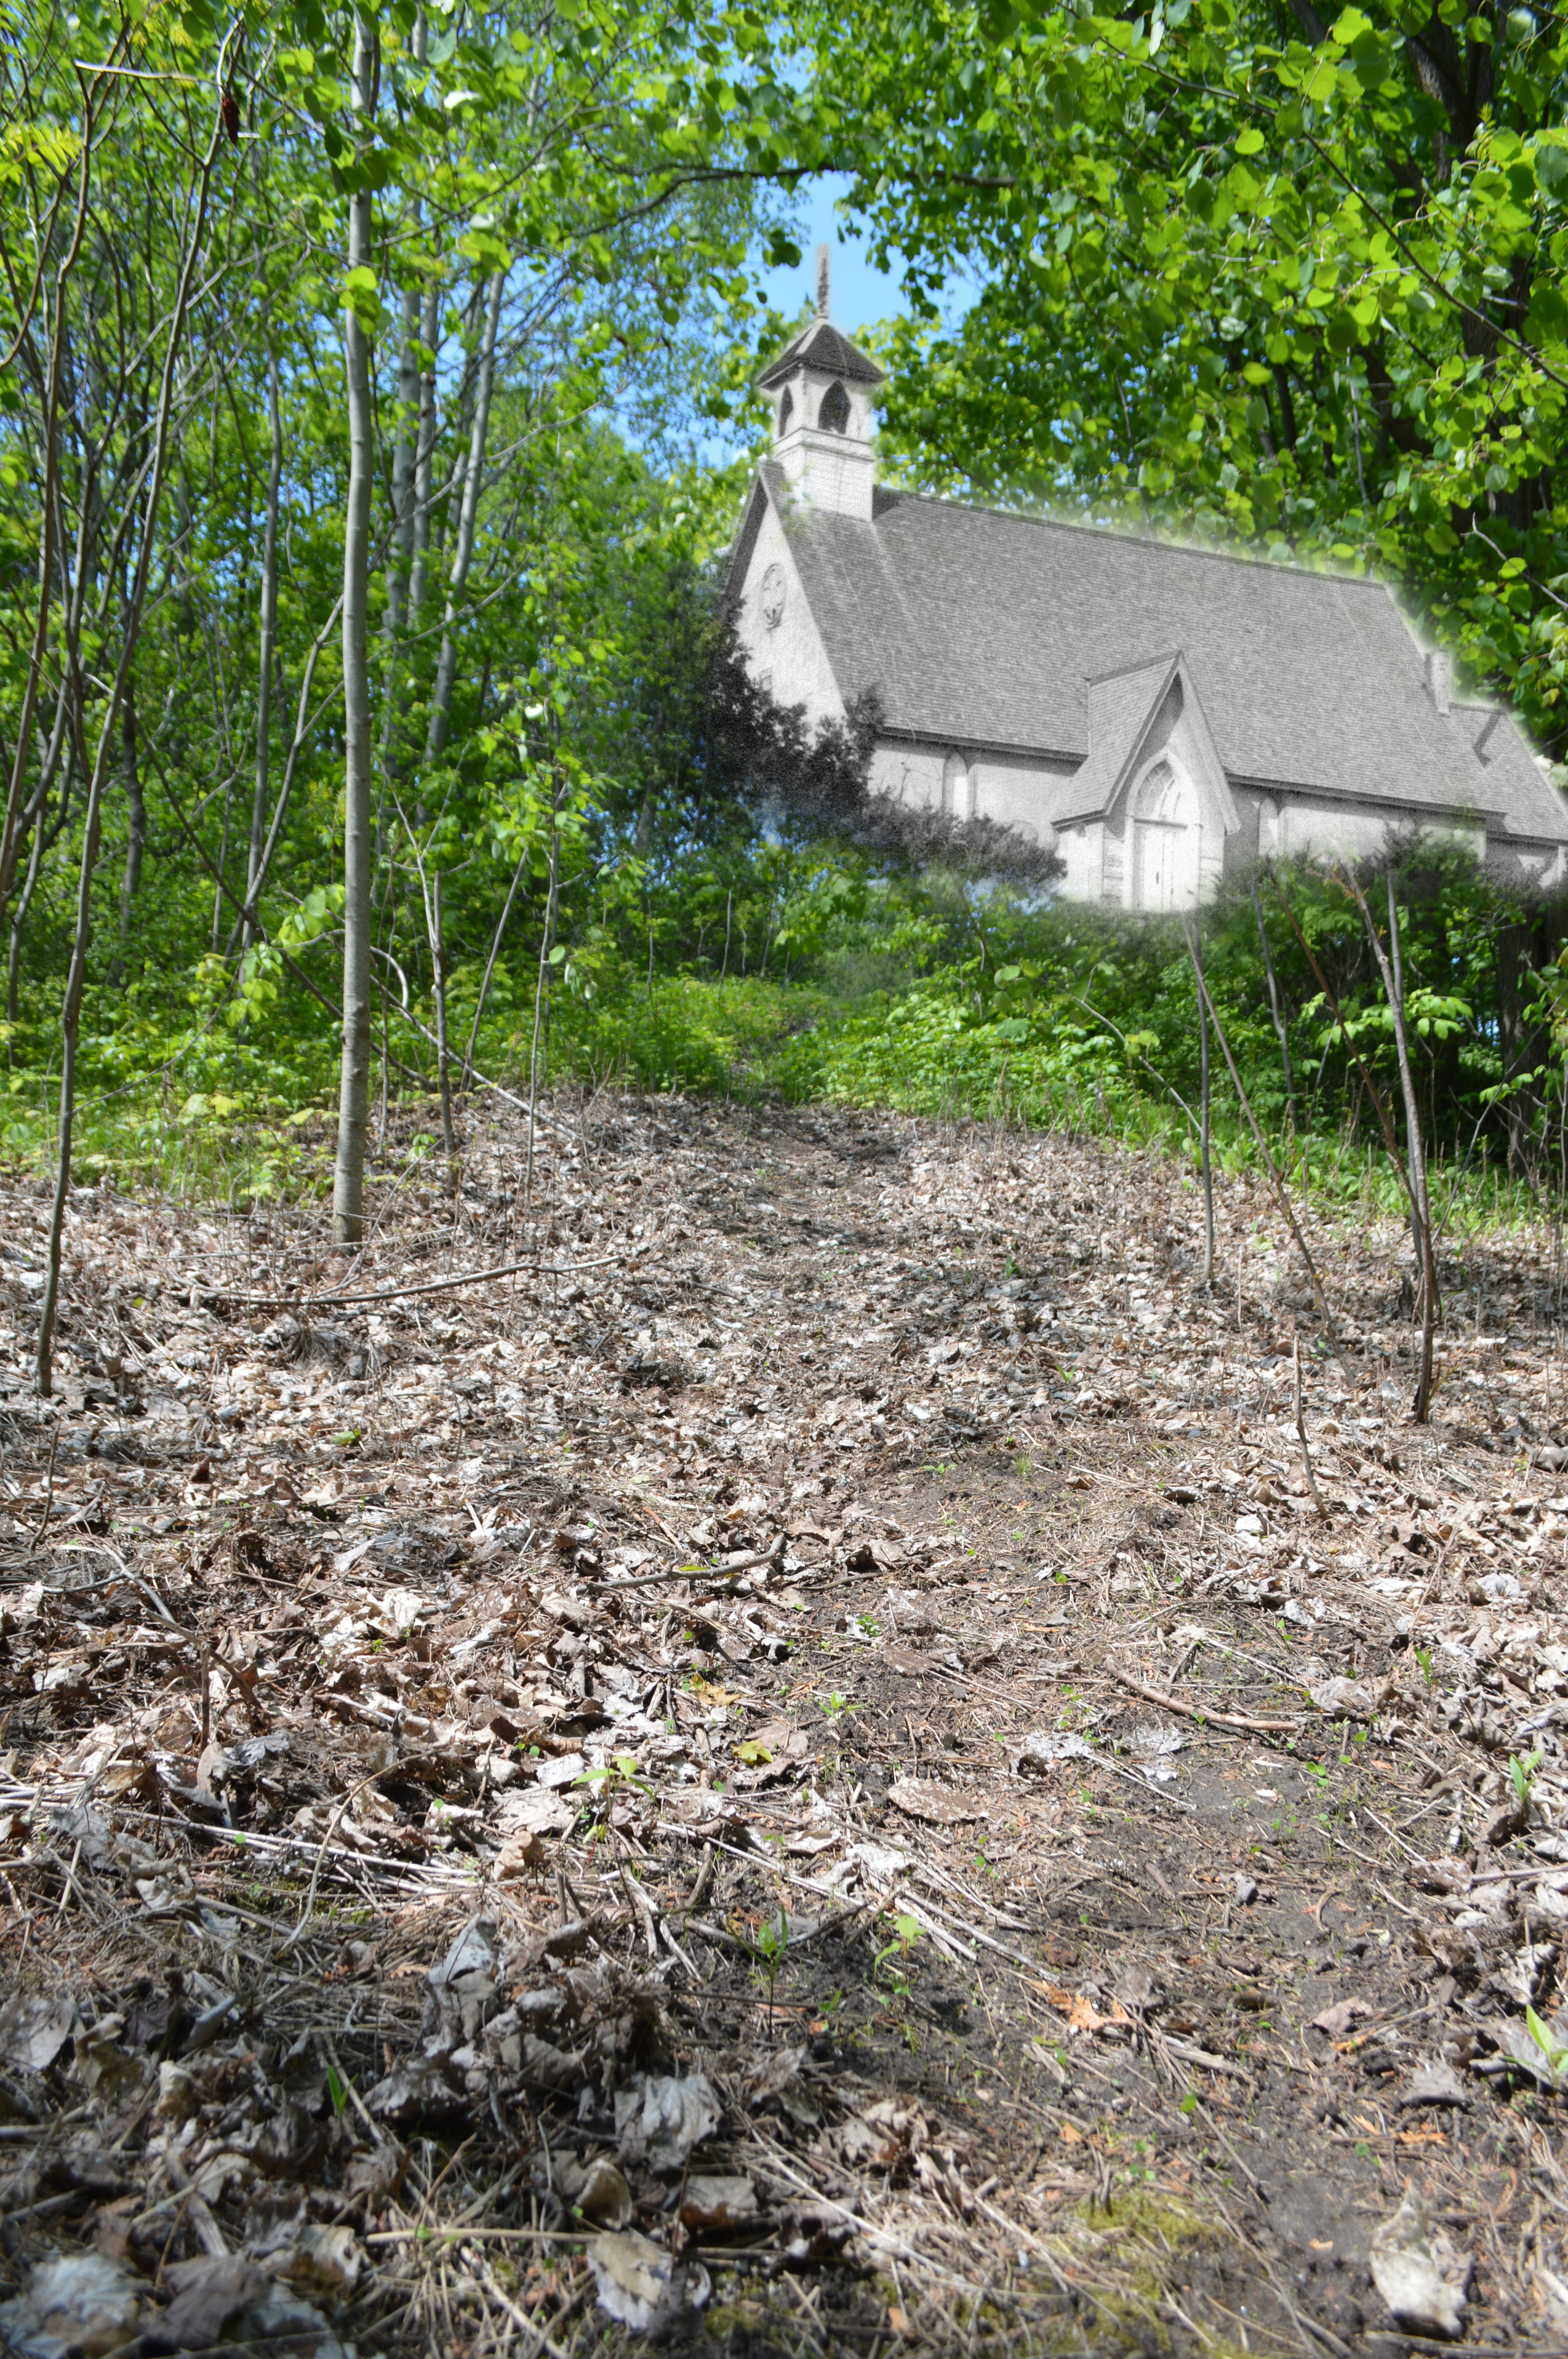 A B&W photograph of a church rising out of a contemporary image of woods.